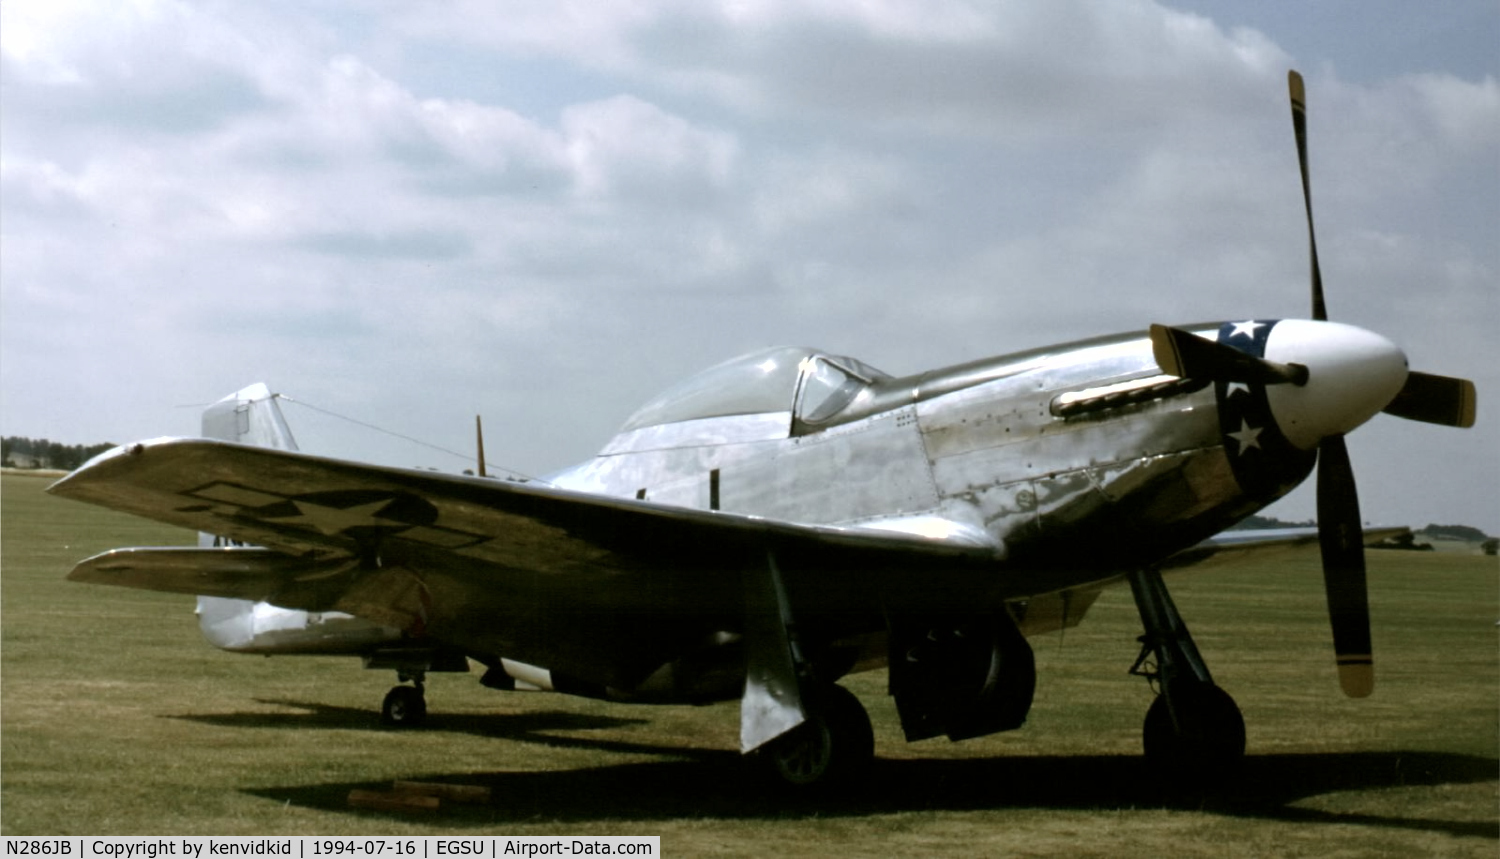 N286JB, 1945 North American P-51D Mustang C/N 4511483, At the 1994 Flying Legends Air Show.